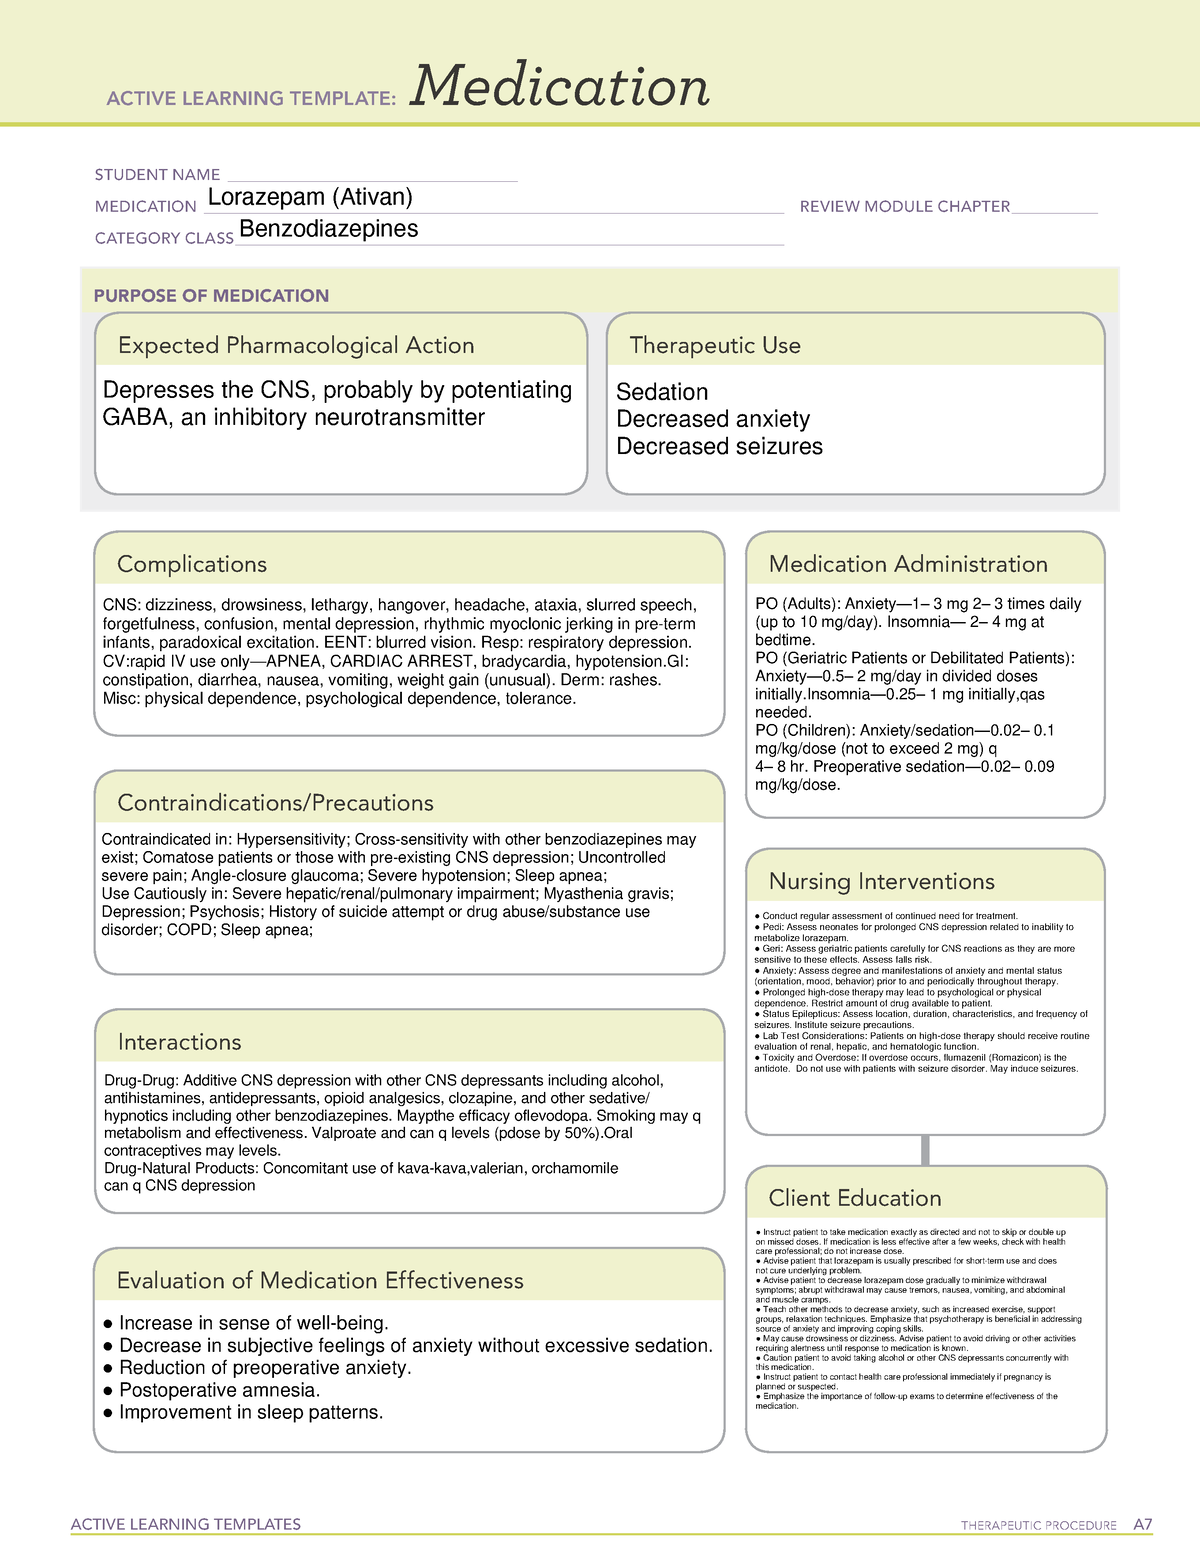 Lorazepam med card Medication Card ACTIVE LEARNING TEMPLATES